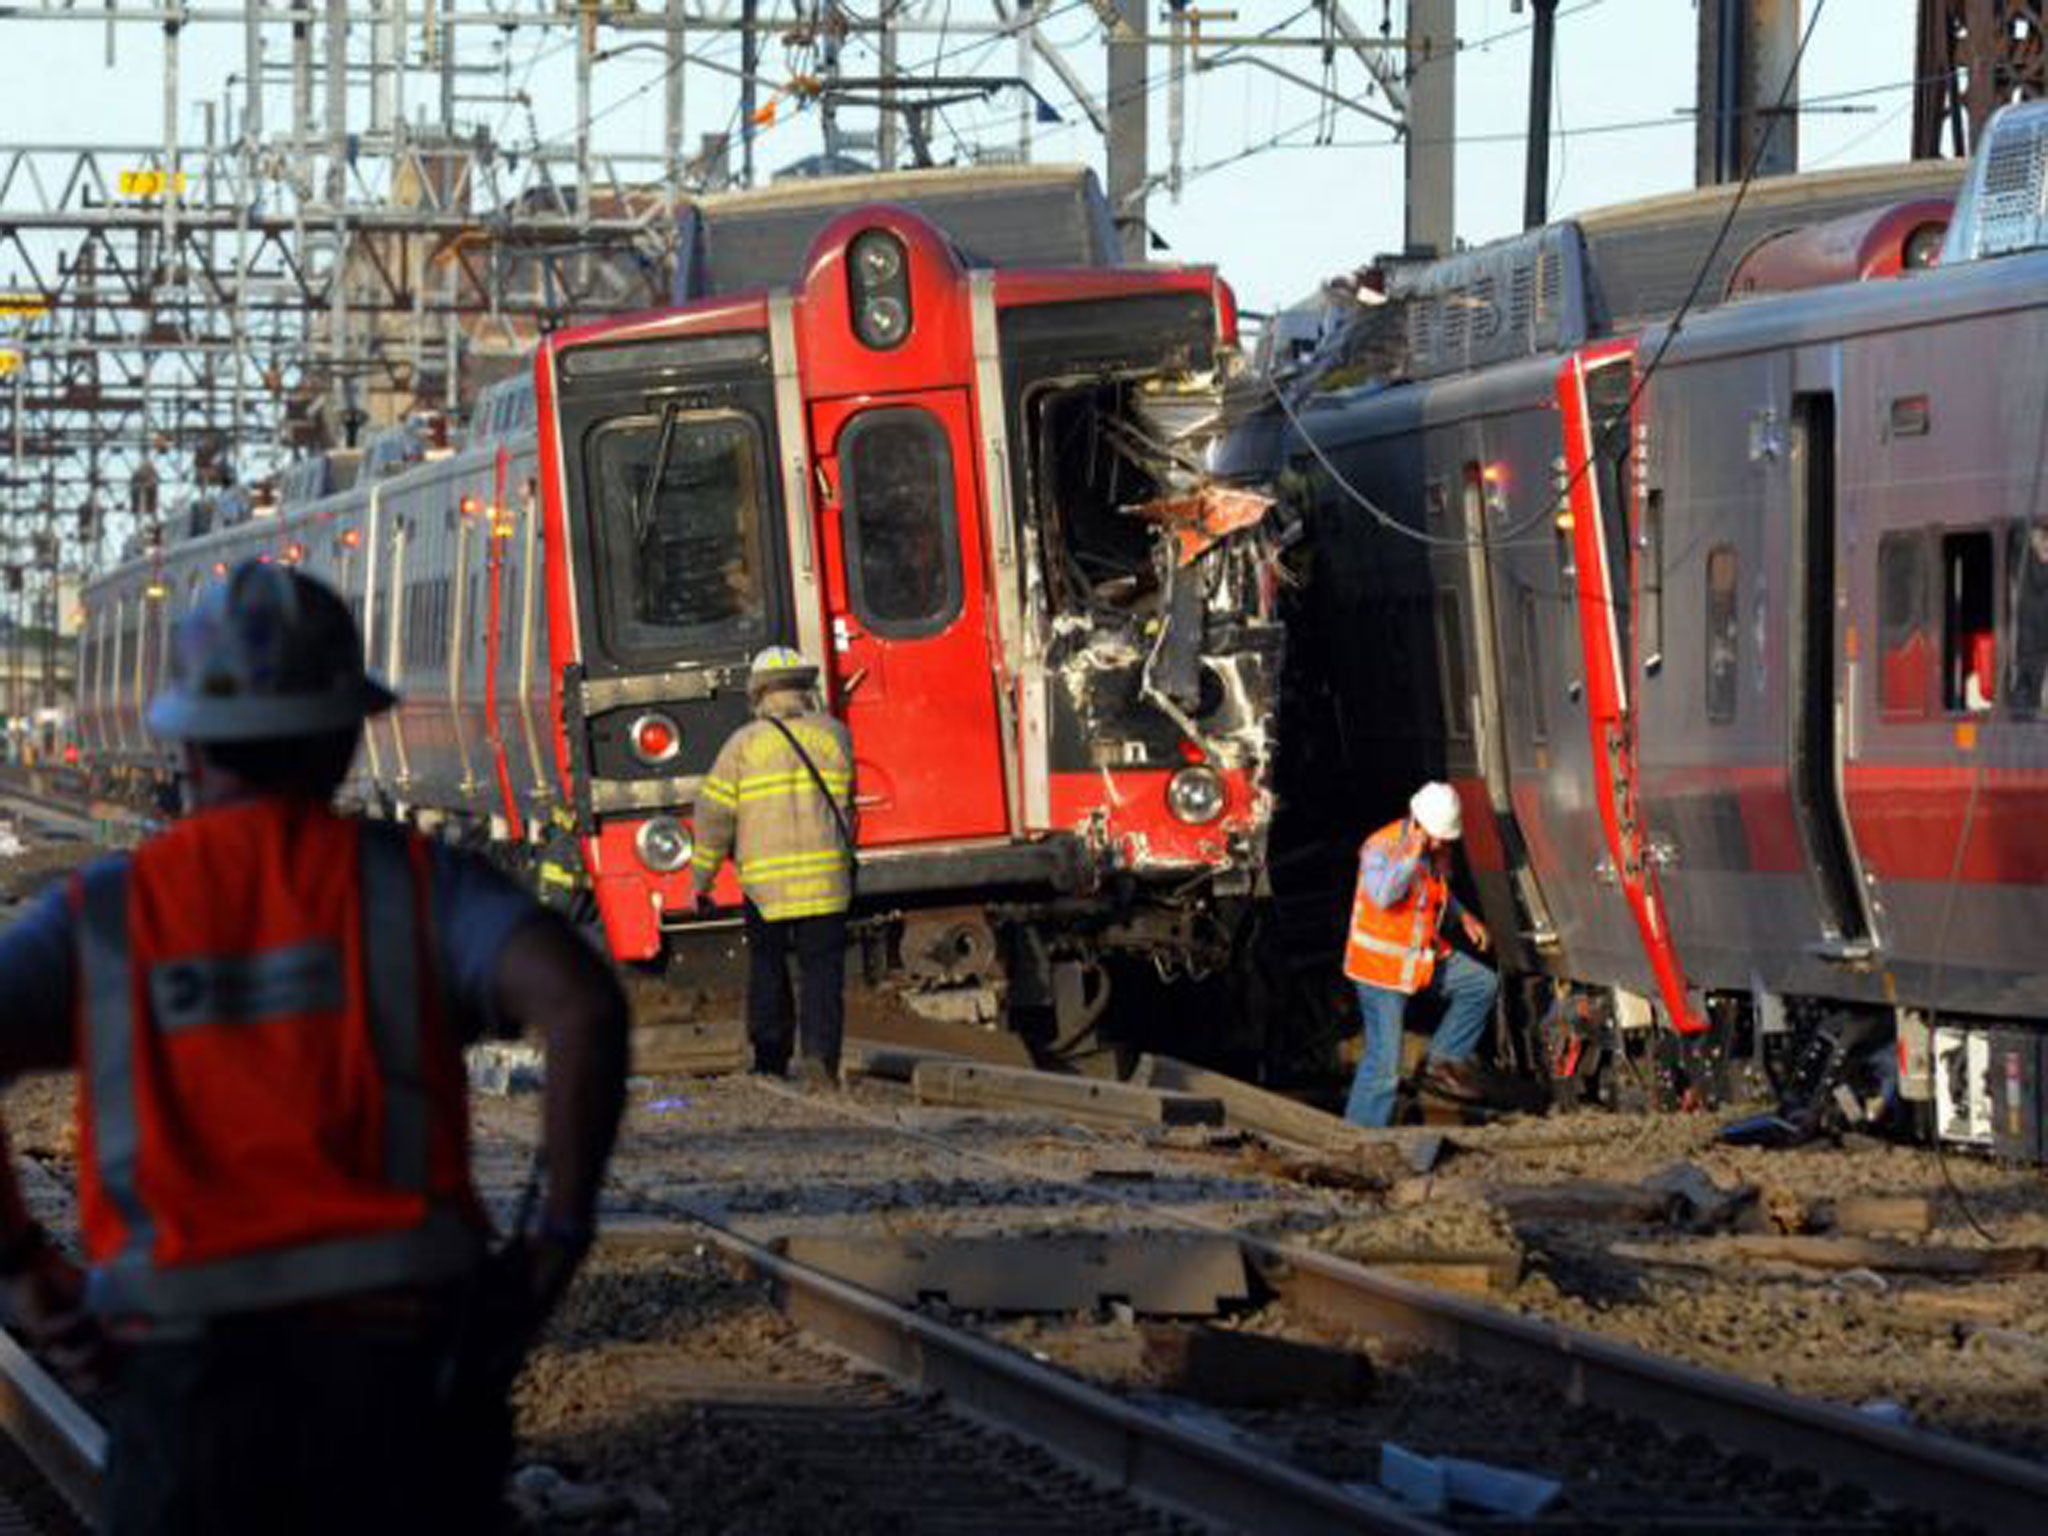 Emergency personnel work at the scene where two Metro North commuter trains collided near Fairfield, Connecticut